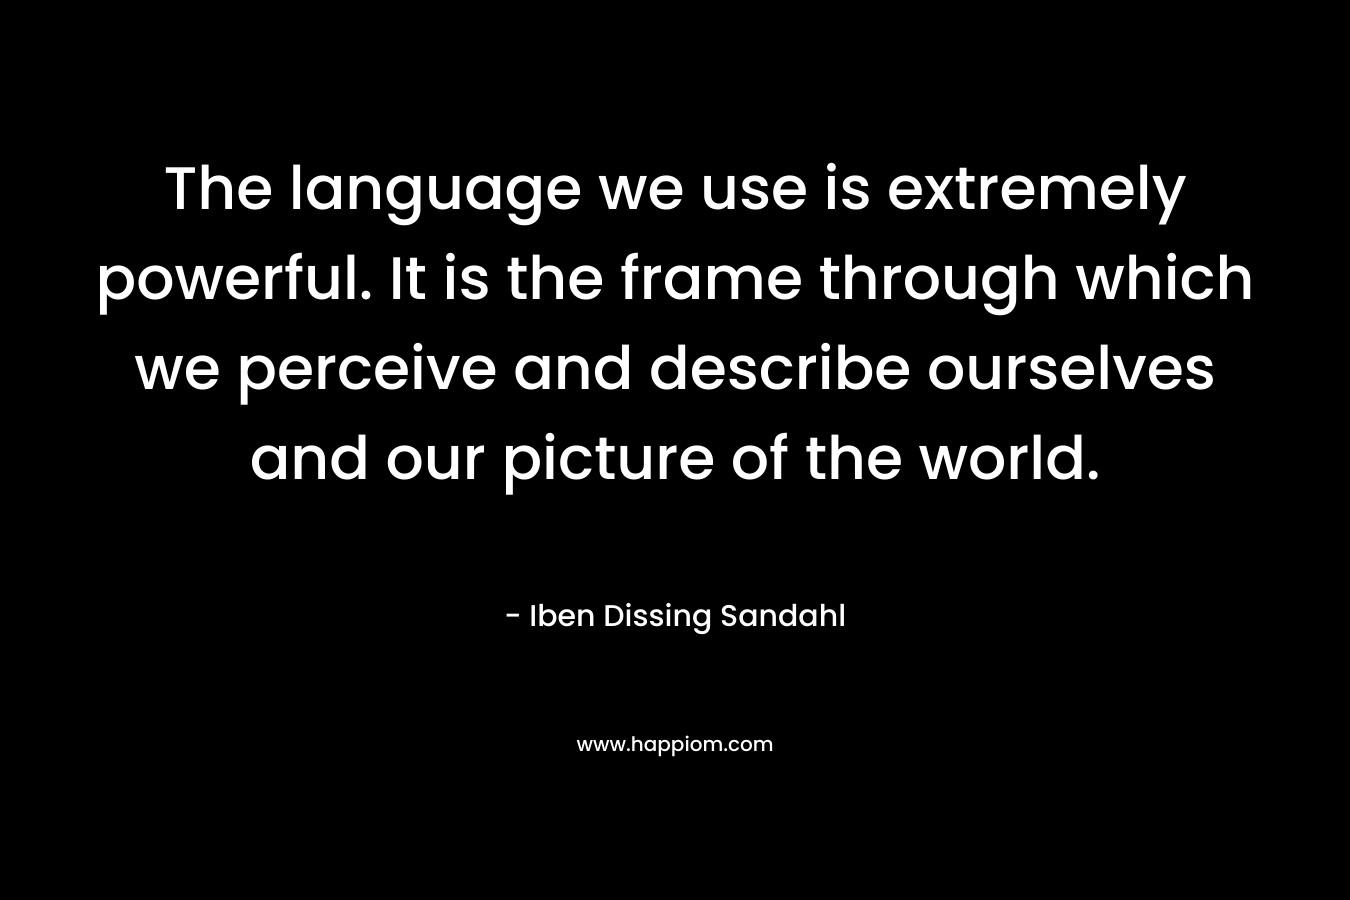 The language we use is extremely powerful. It is the frame through which we perceive and describe ourselves and our picture of the world.